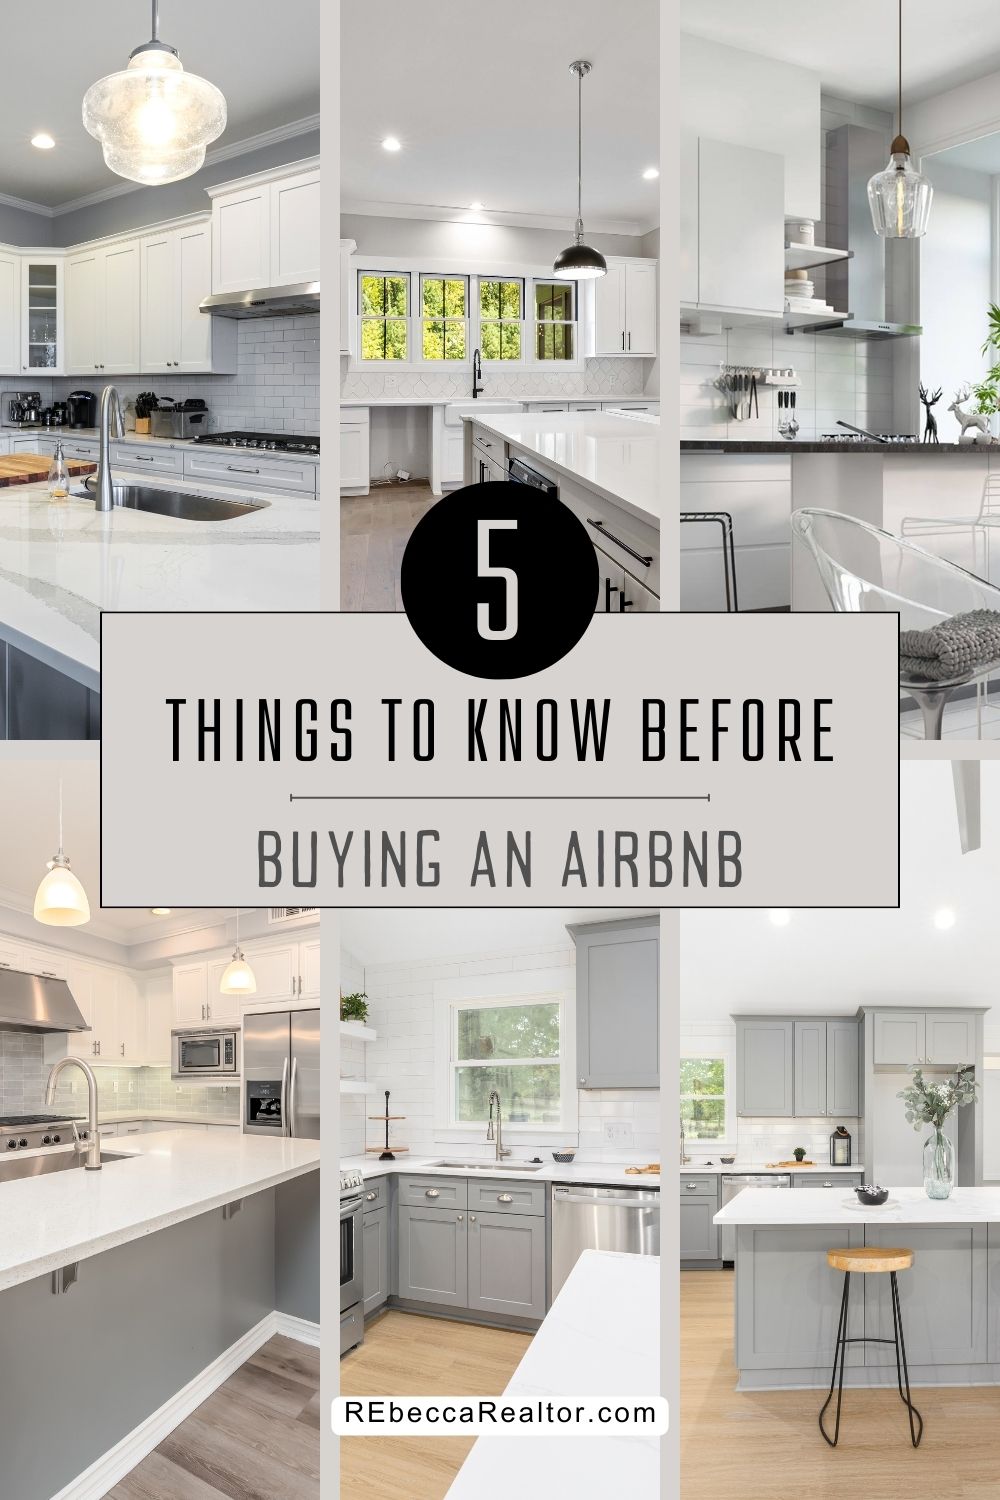 Top 5 Things To Consider Before Buying An AirBnb